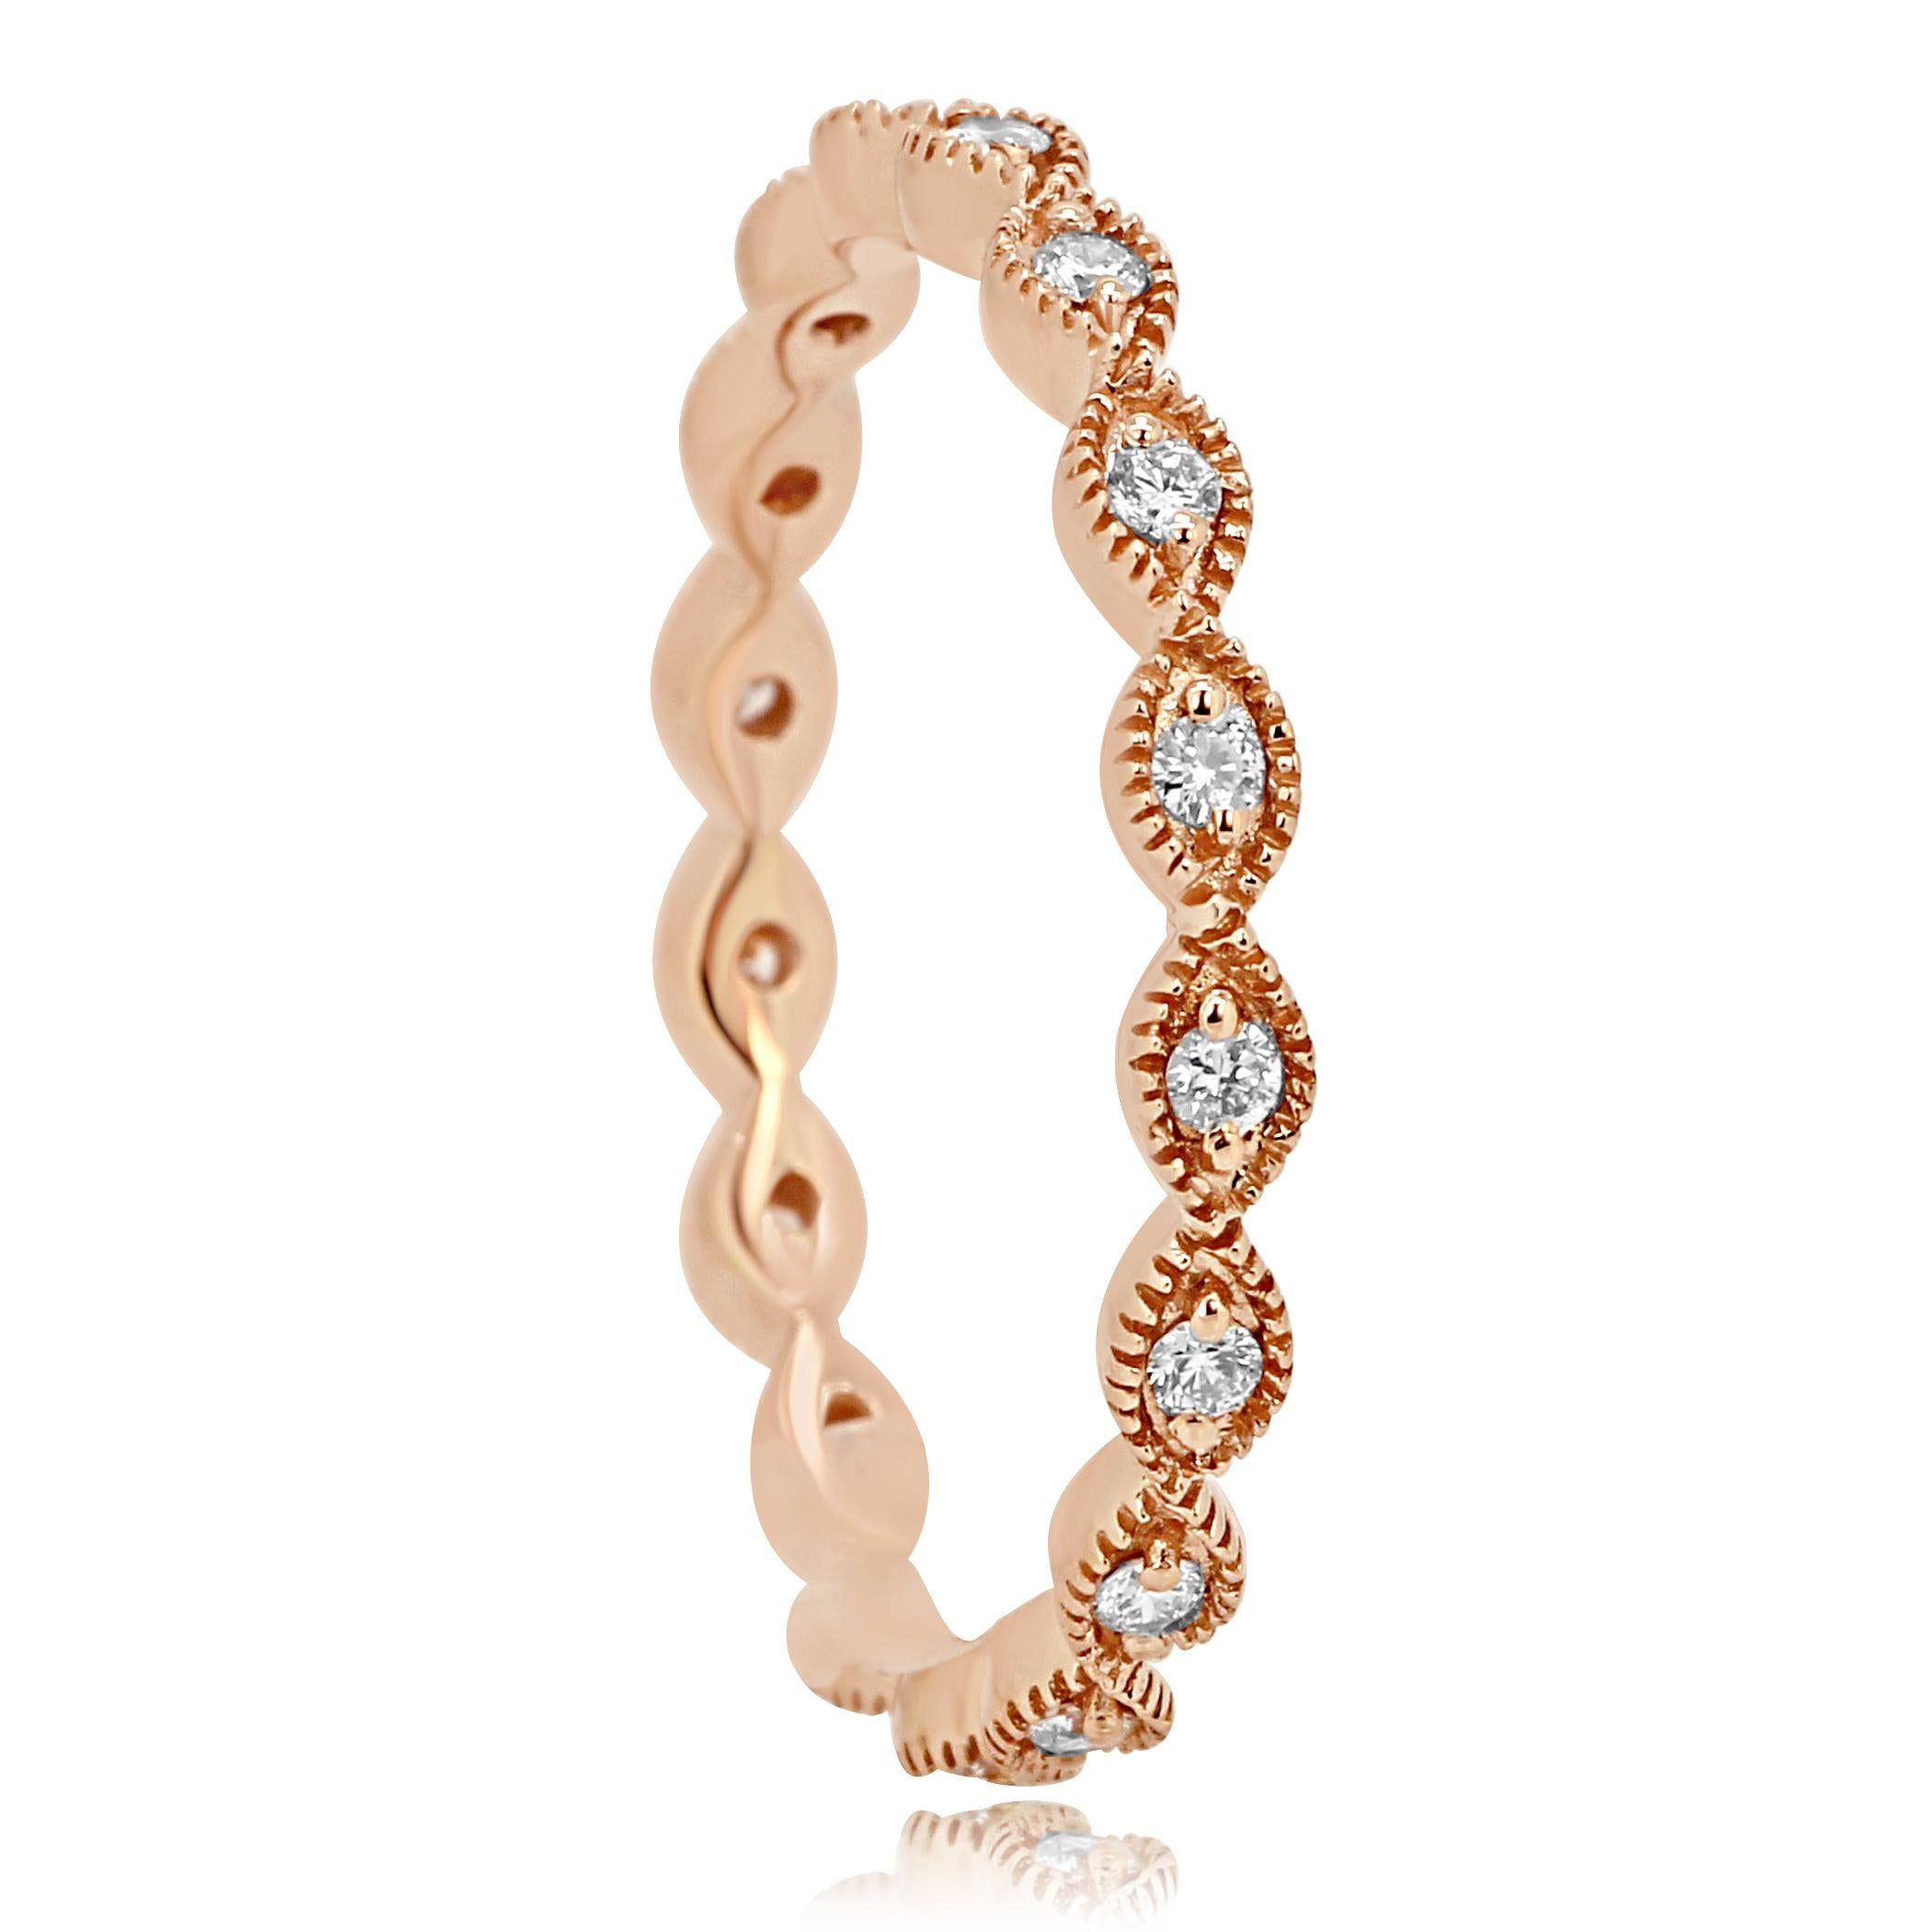 Chic Eternity Band with white diamond rounds 0.19 Carat set in 14K Rose Gold Ring with Milgrain work  also can be worn as a stackable band. 

Total Weight 0.19 Carat
Can be customized to any Finger size available in all the gold colors. 